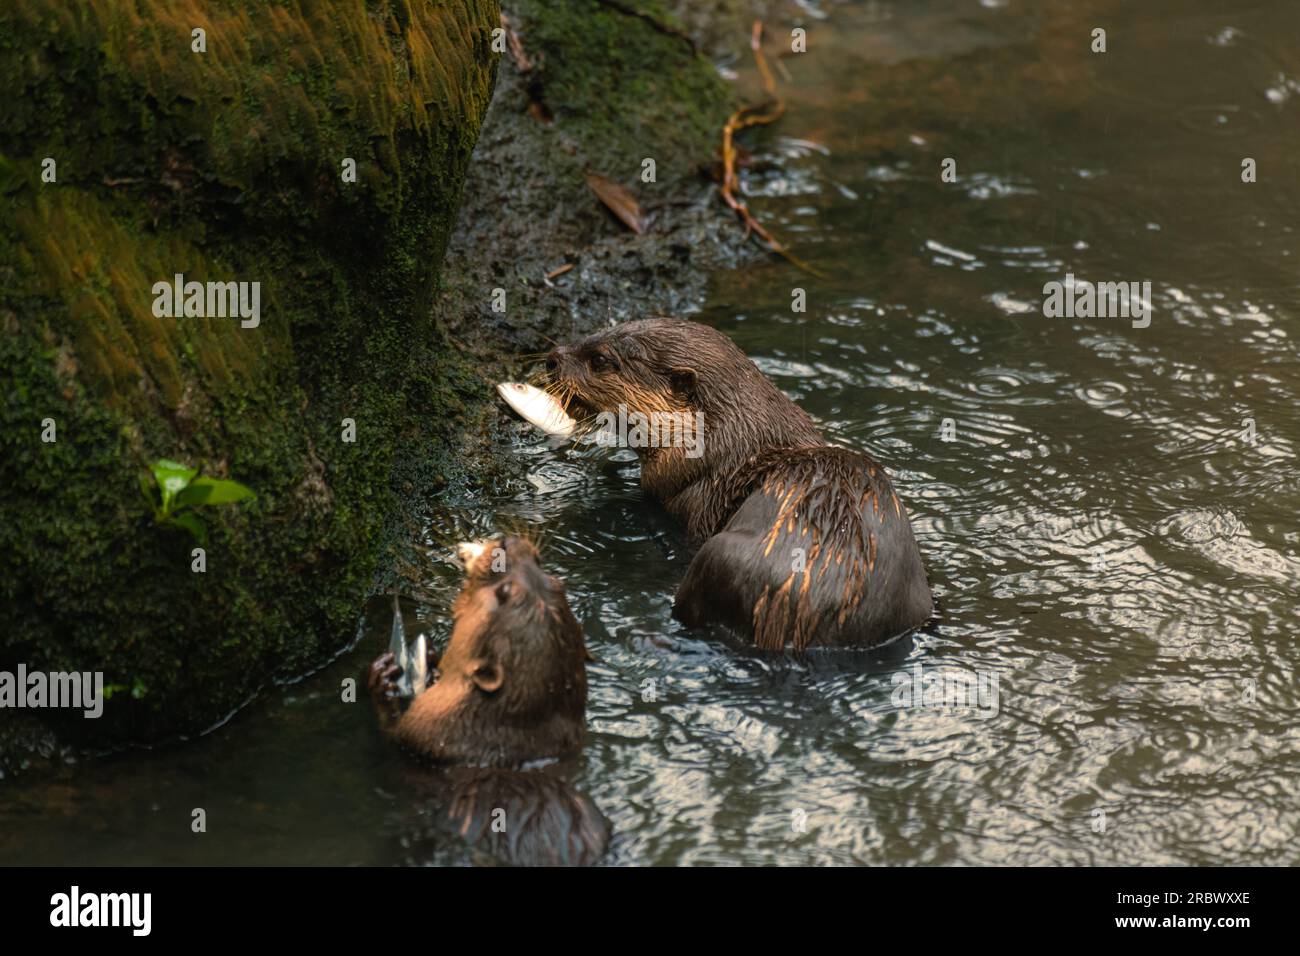 Giant River Otter, Pteronura brasiliensis, eating fish on the shore Matto Grosso, Brazil, South America Stock Photo